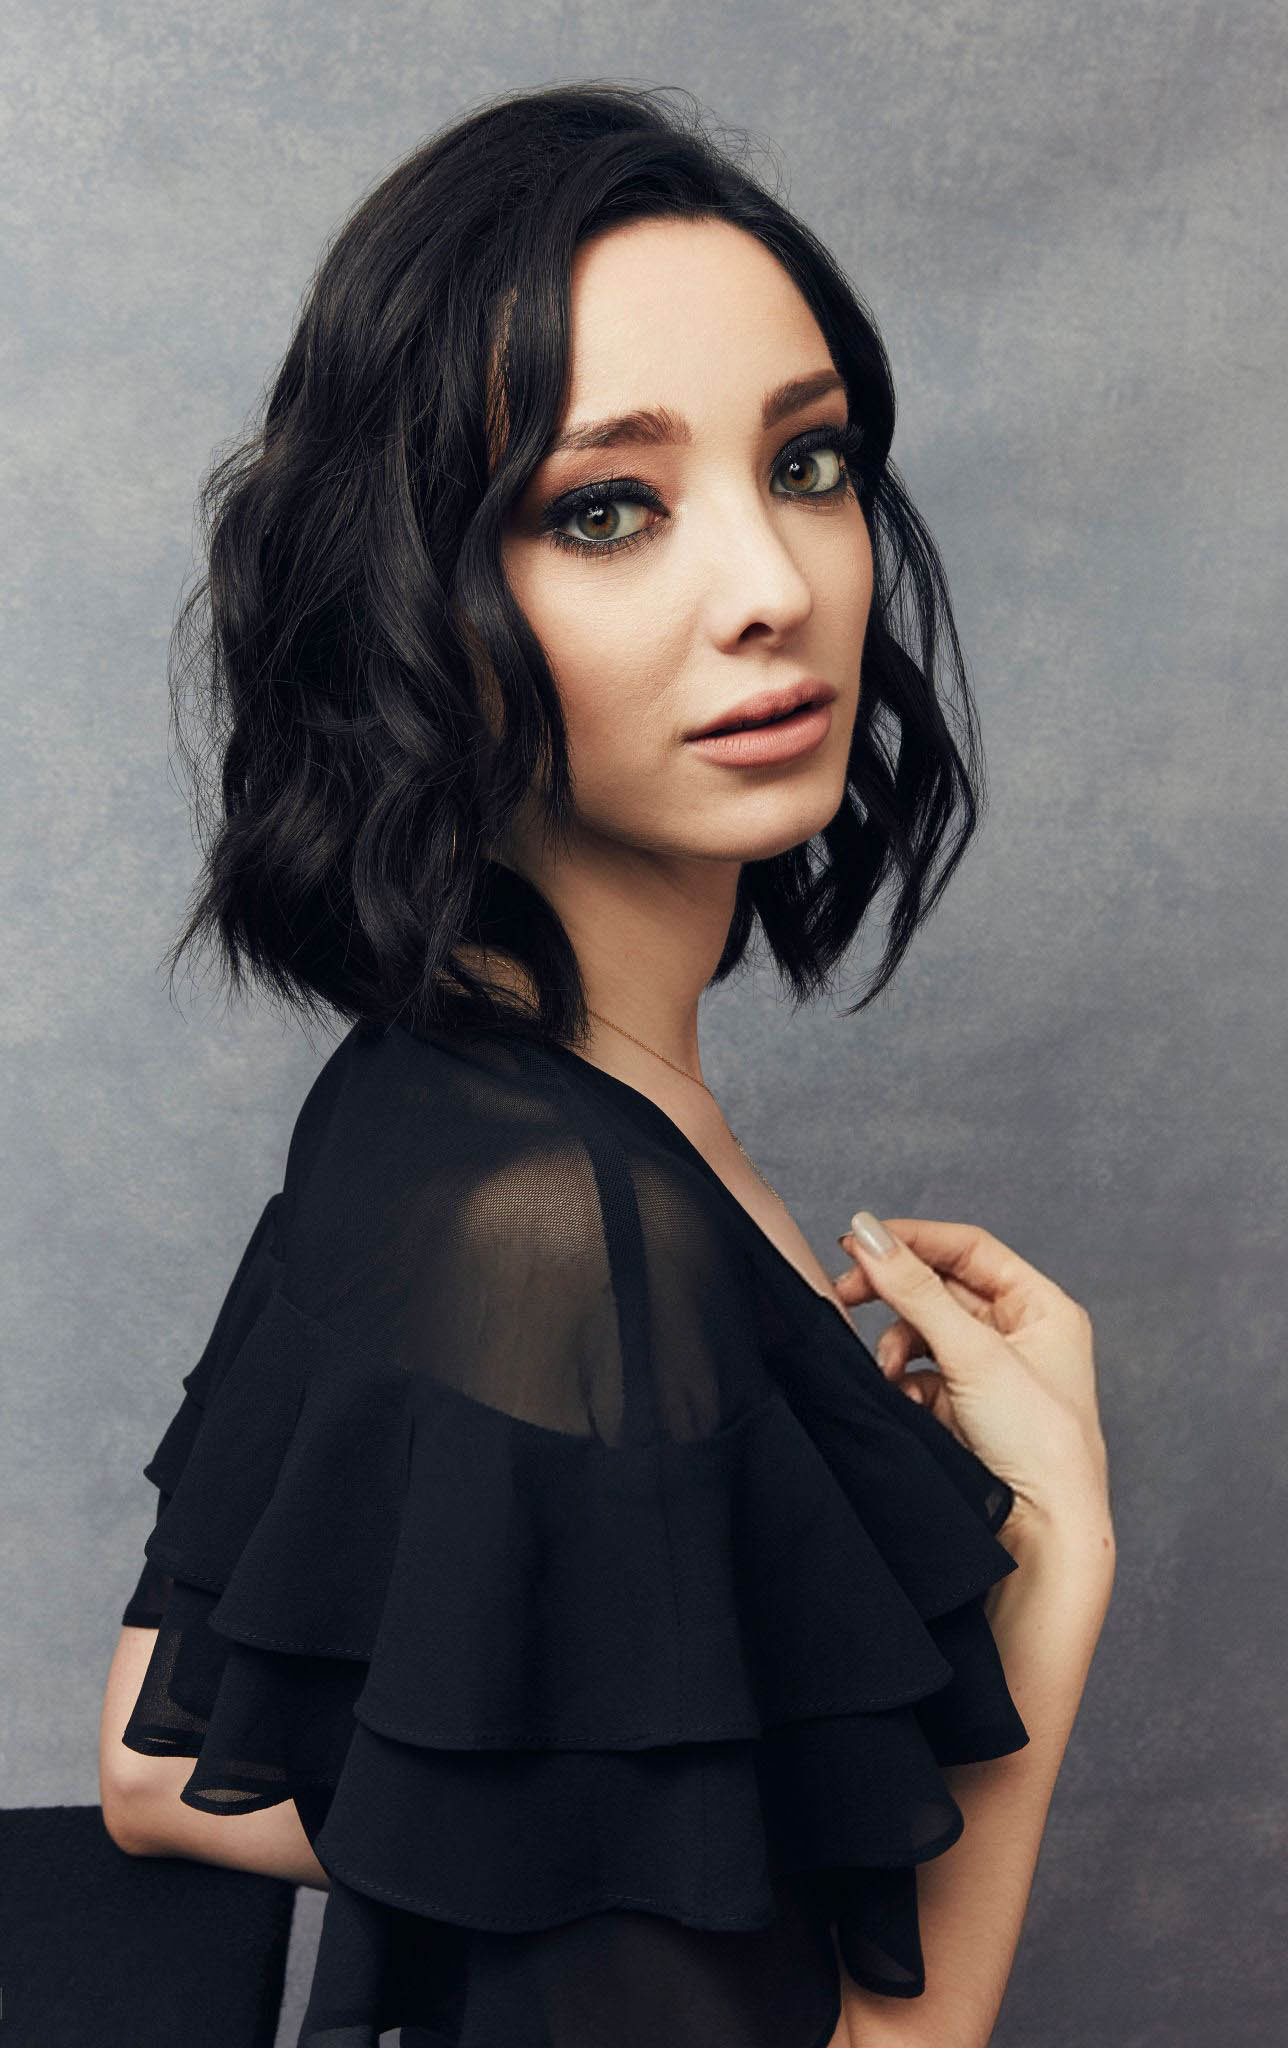 The Gifted Season 1 Cast Portrait - Emma Dumont - The Gifted TV Series Photo 41054503 - Fanpop 1290x2050